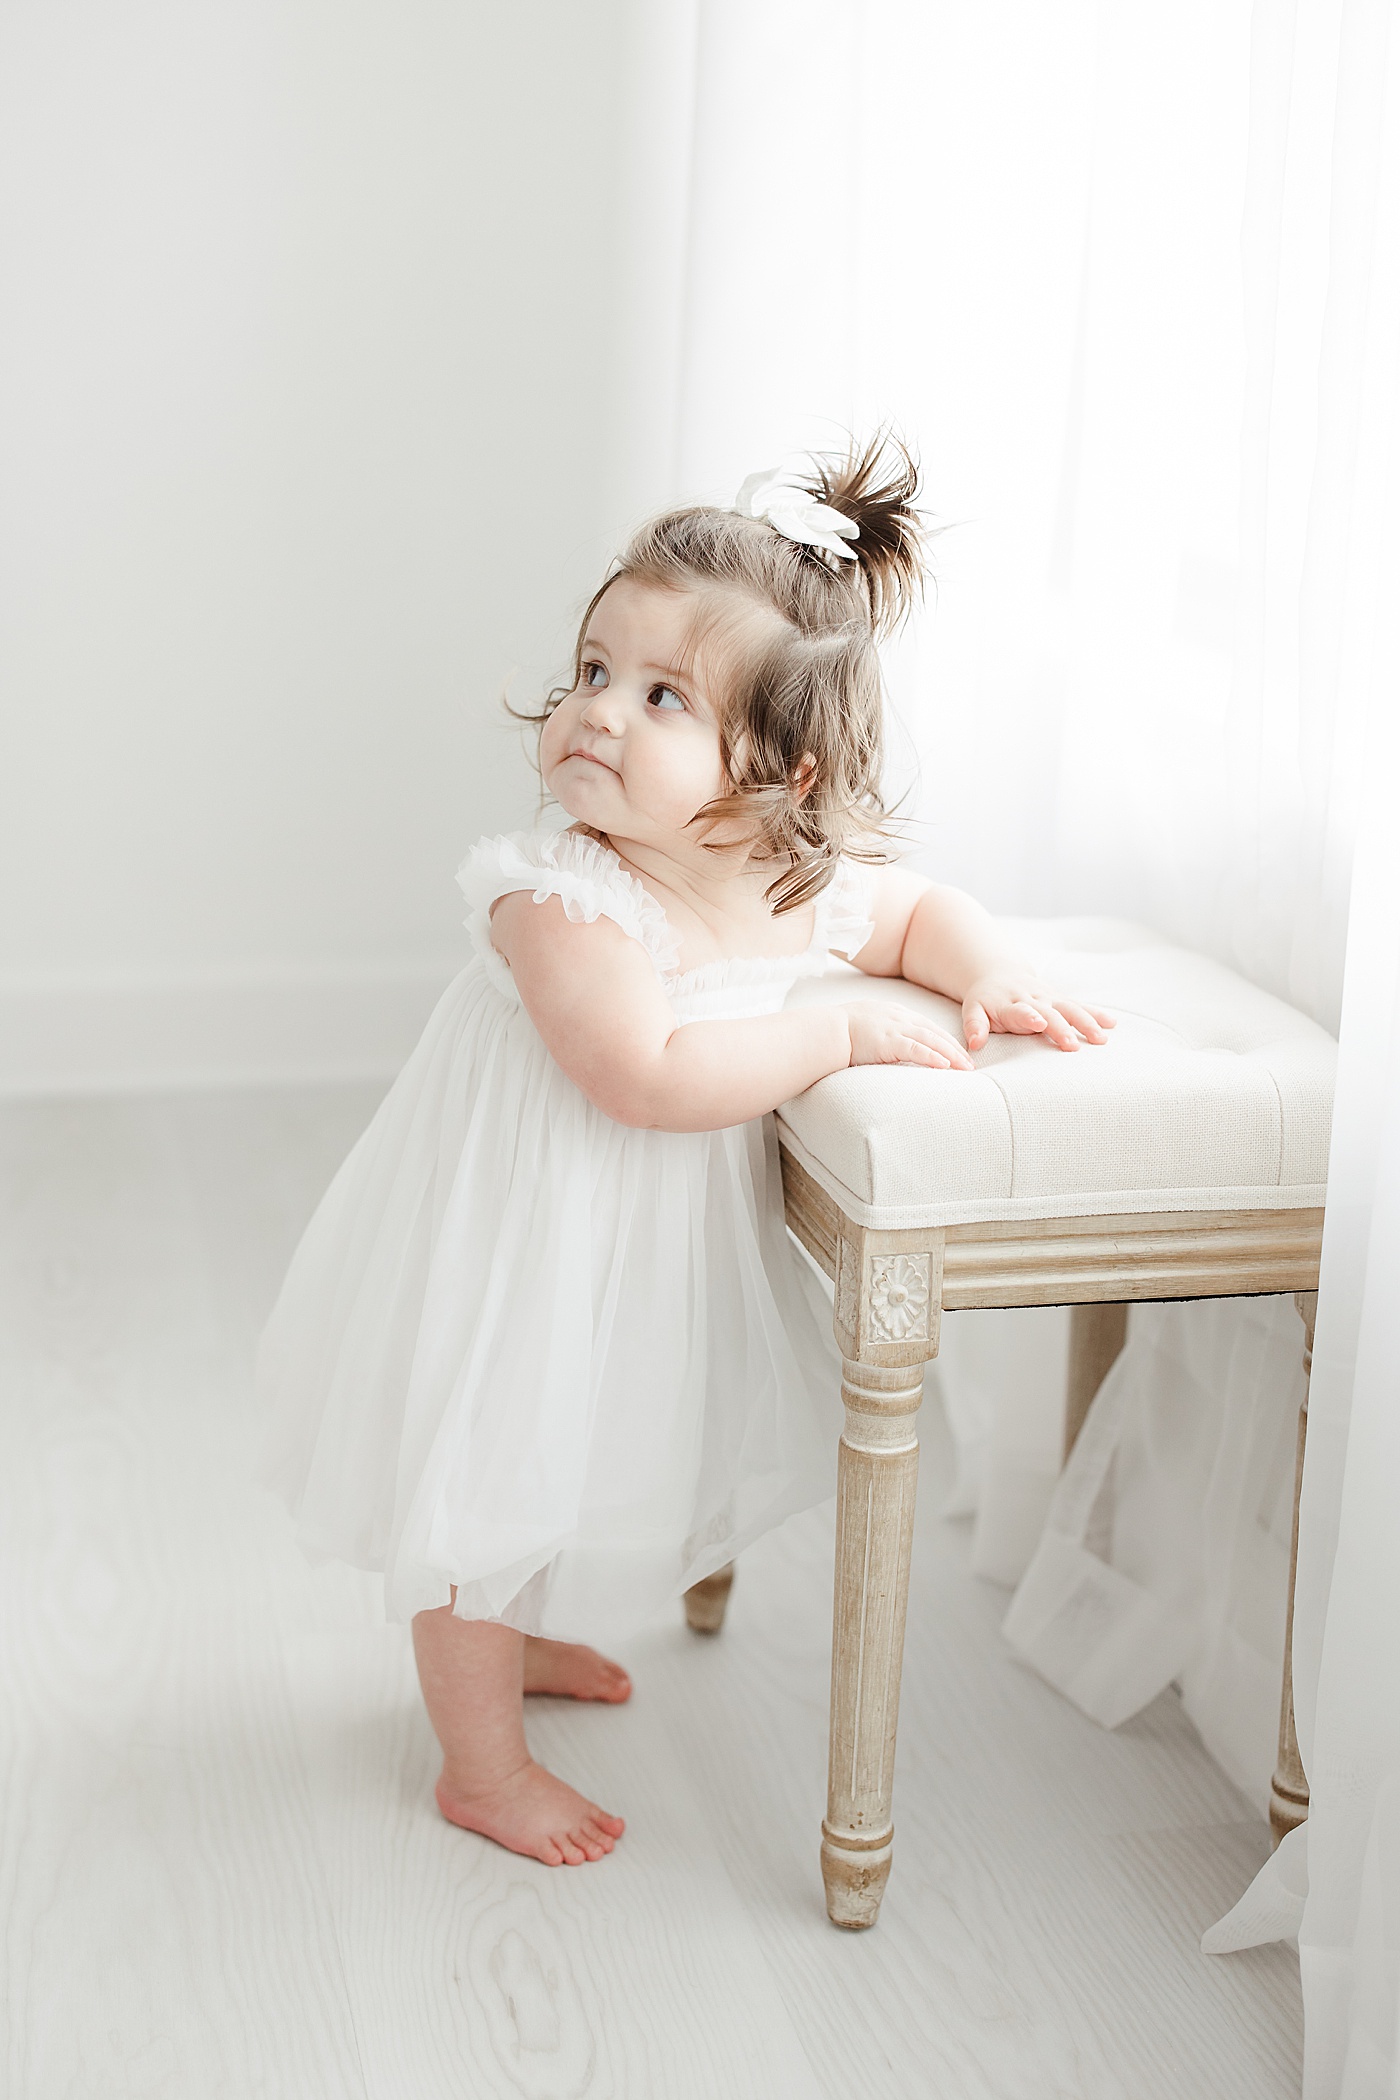 One year old girl standing by stool | Kristin Wood Photography